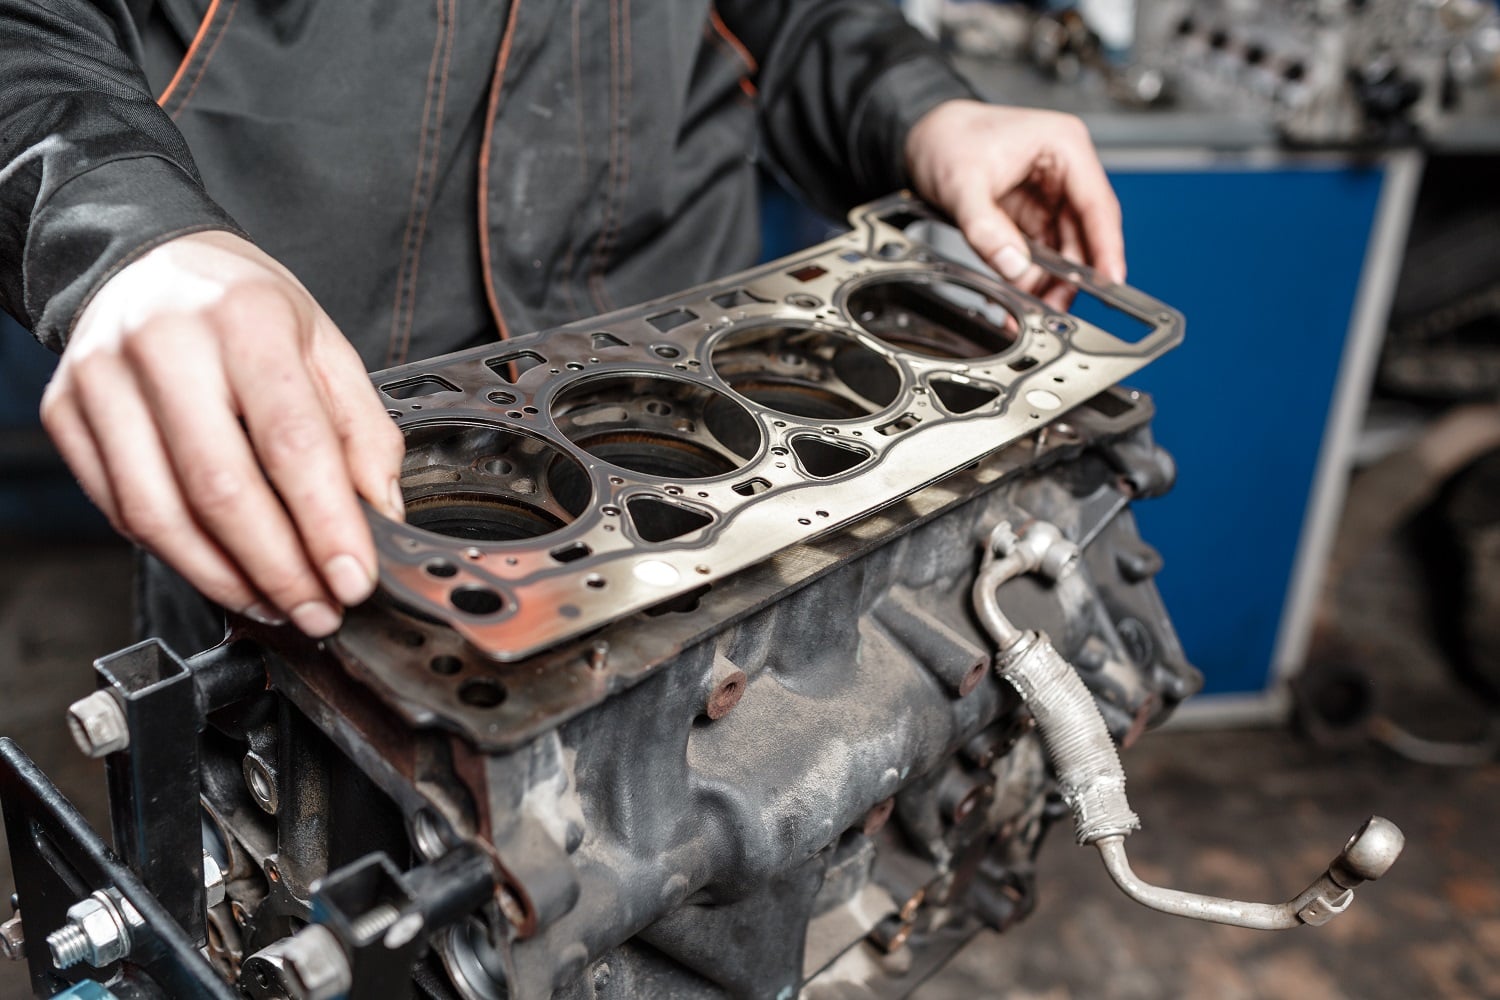 An image of a head gasket being placed on an engine block.